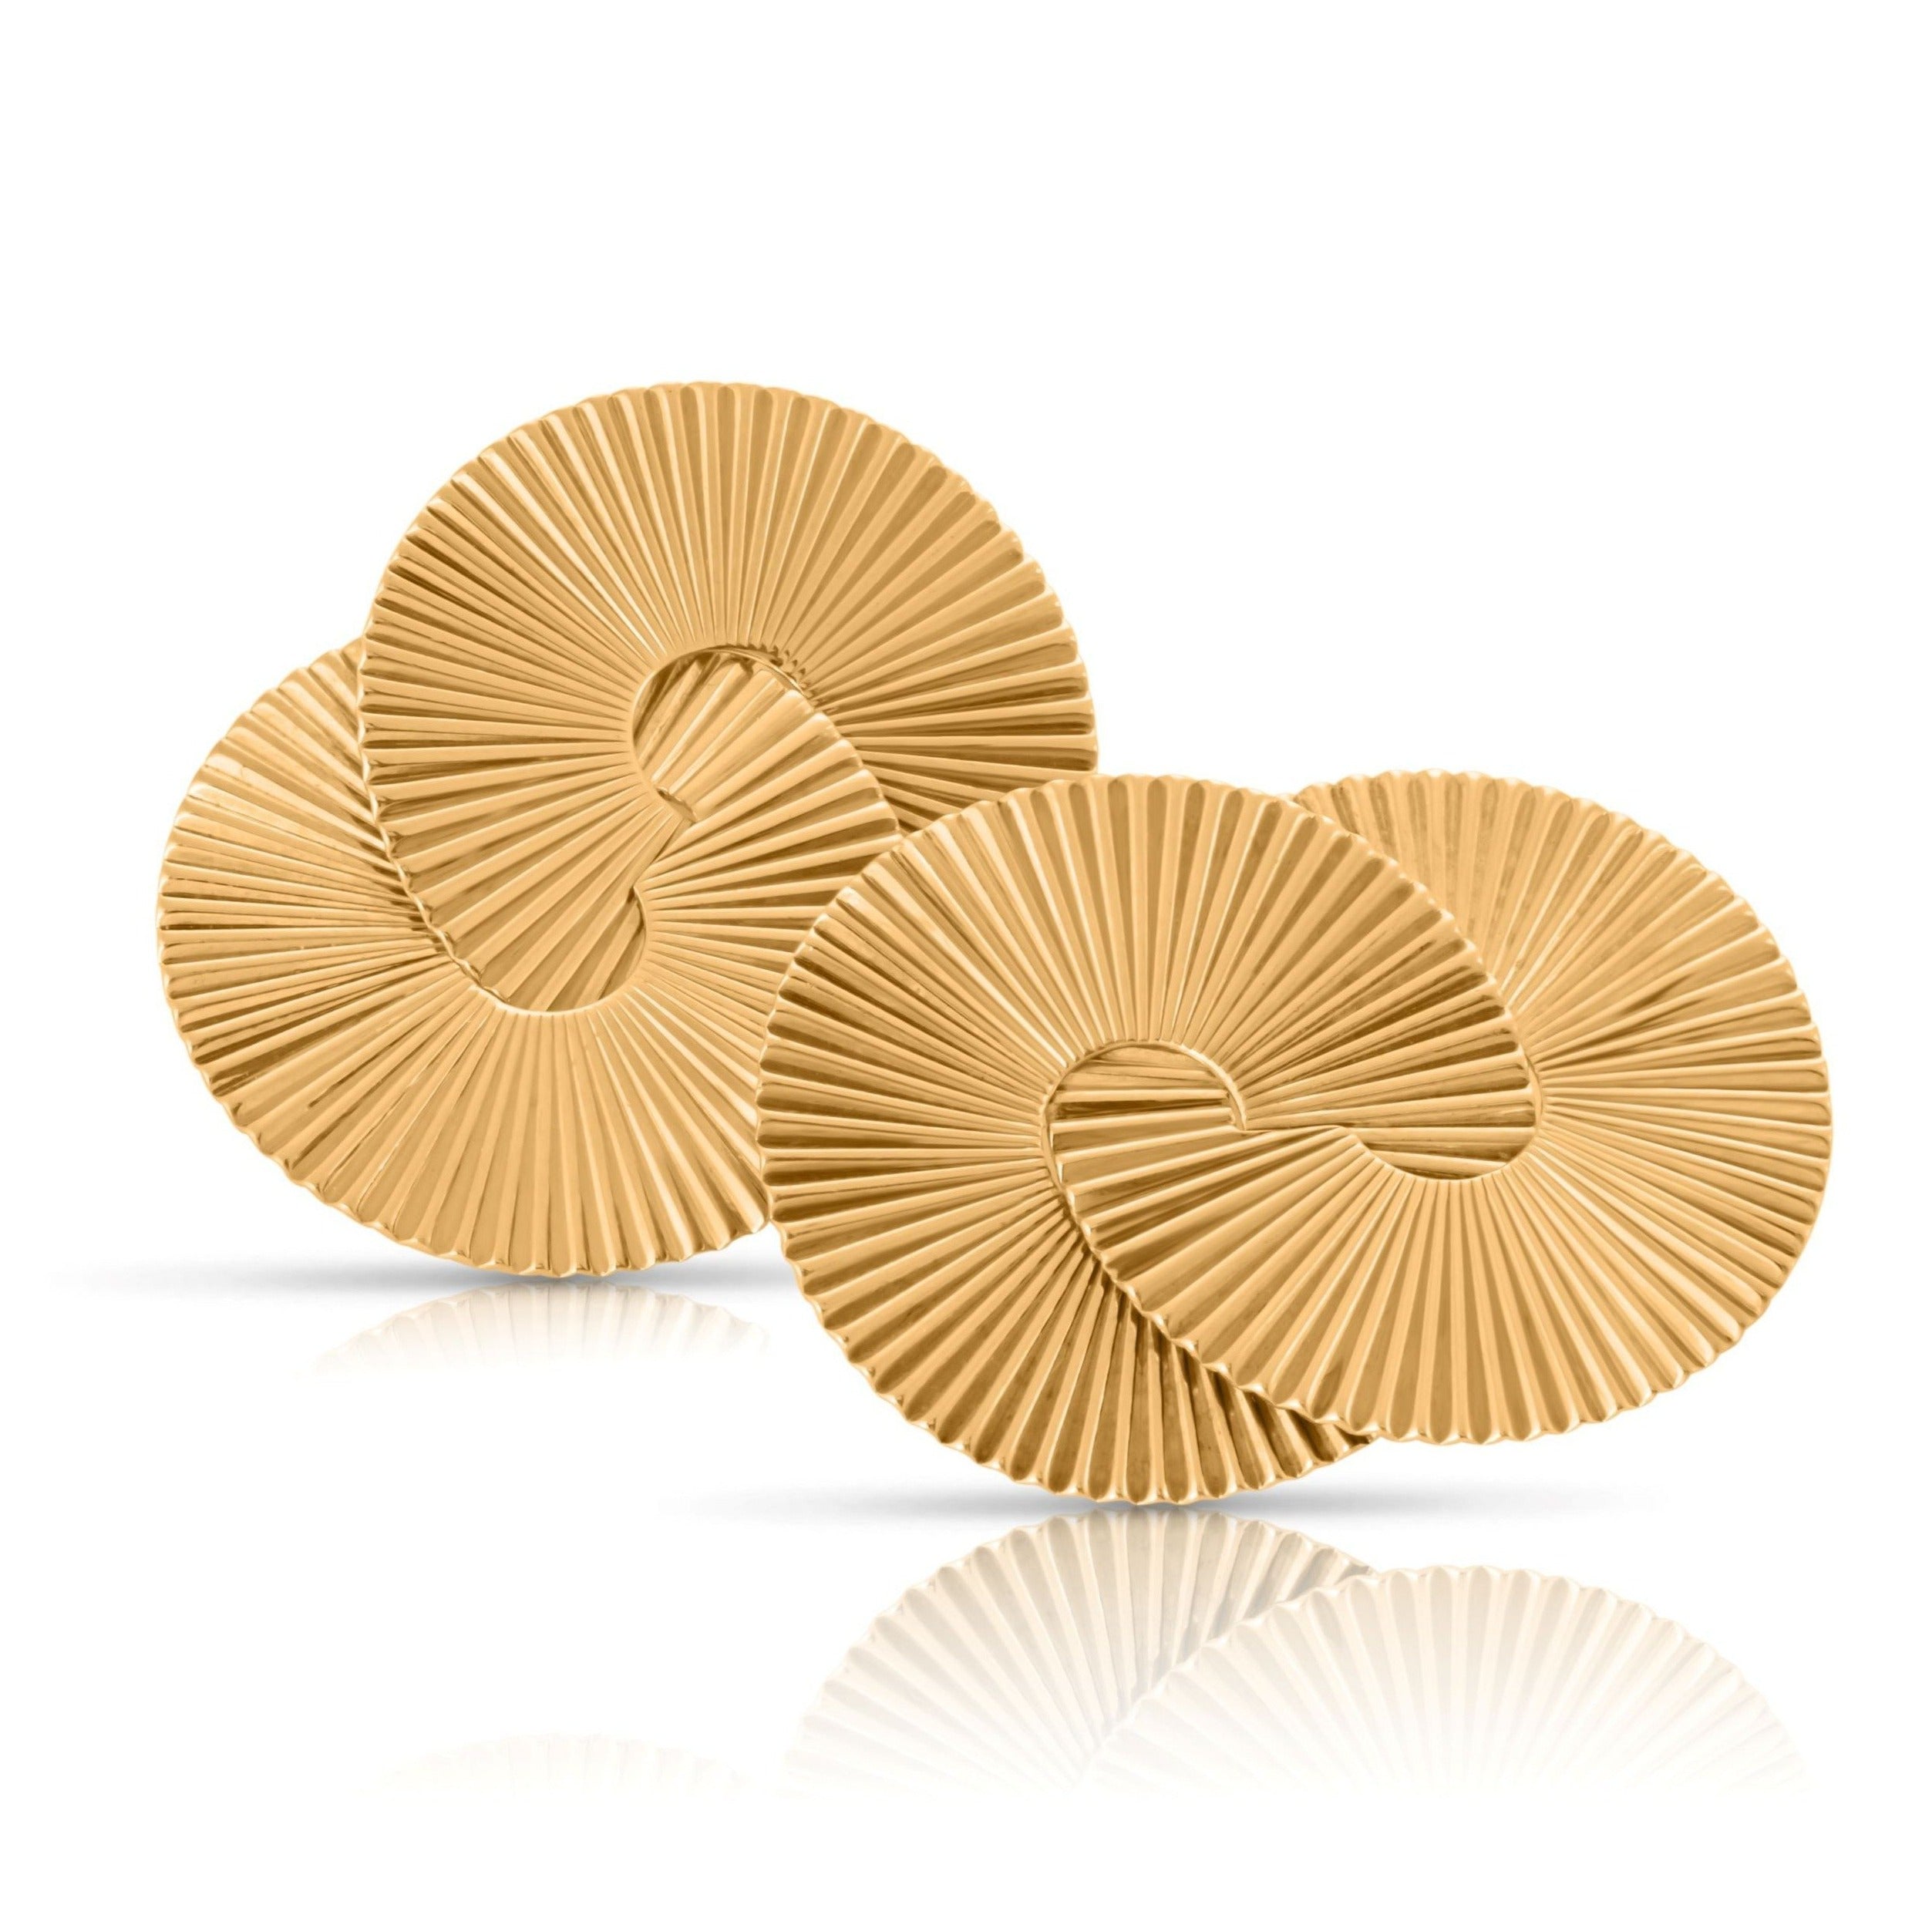 1950s fan-shaped gold brooches designed as interlocking circles.